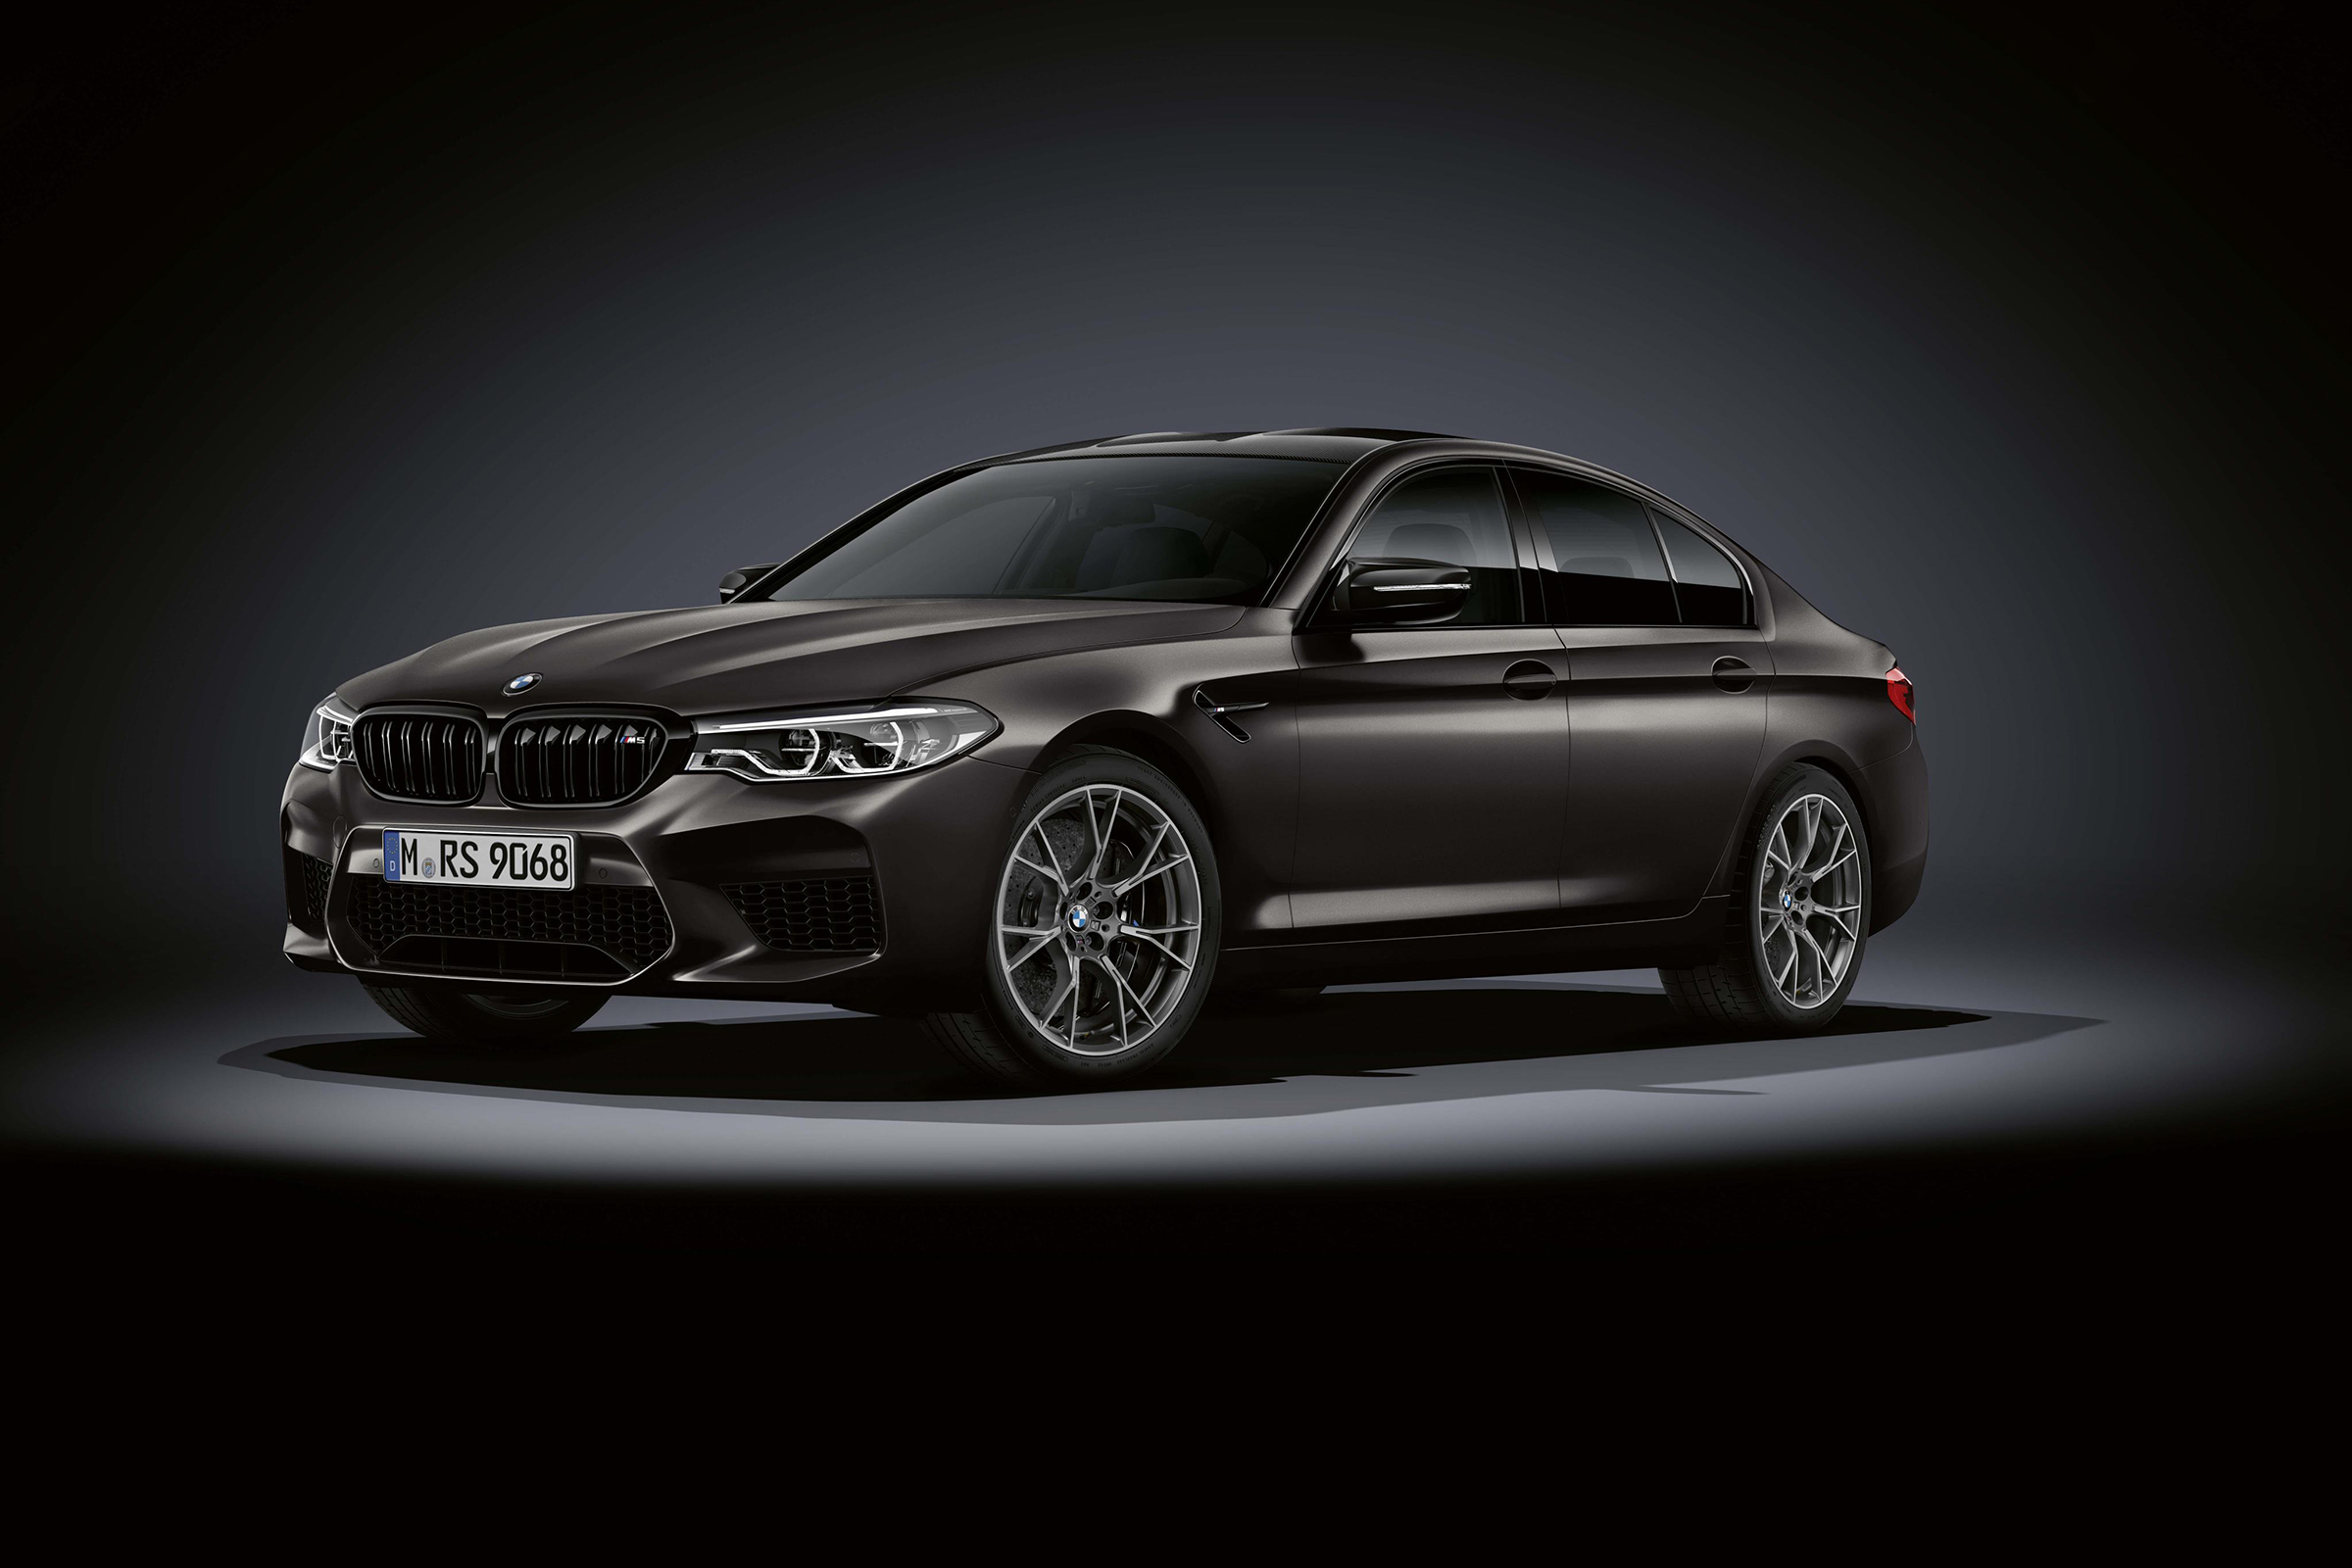 The Ultimate Driving Machine: The 2019 BMW M5 Edition 35 Jahre